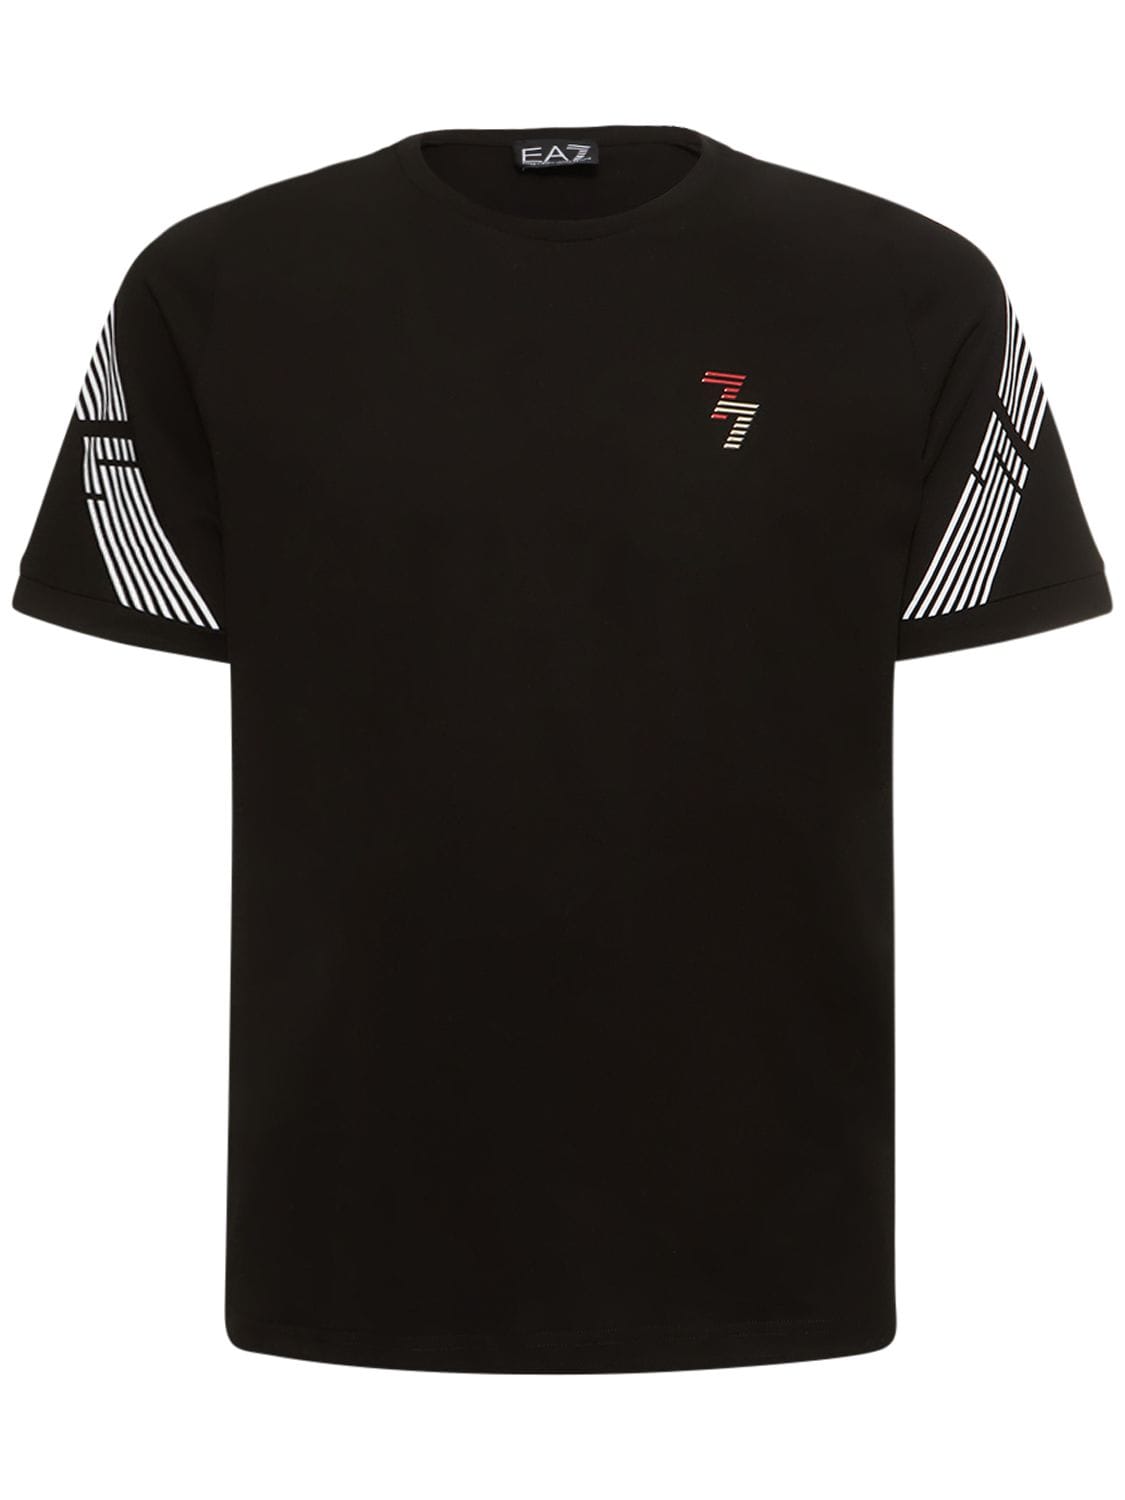 EA7 7 LINES RECYCLED COTTON JERSEY T-SHIRT